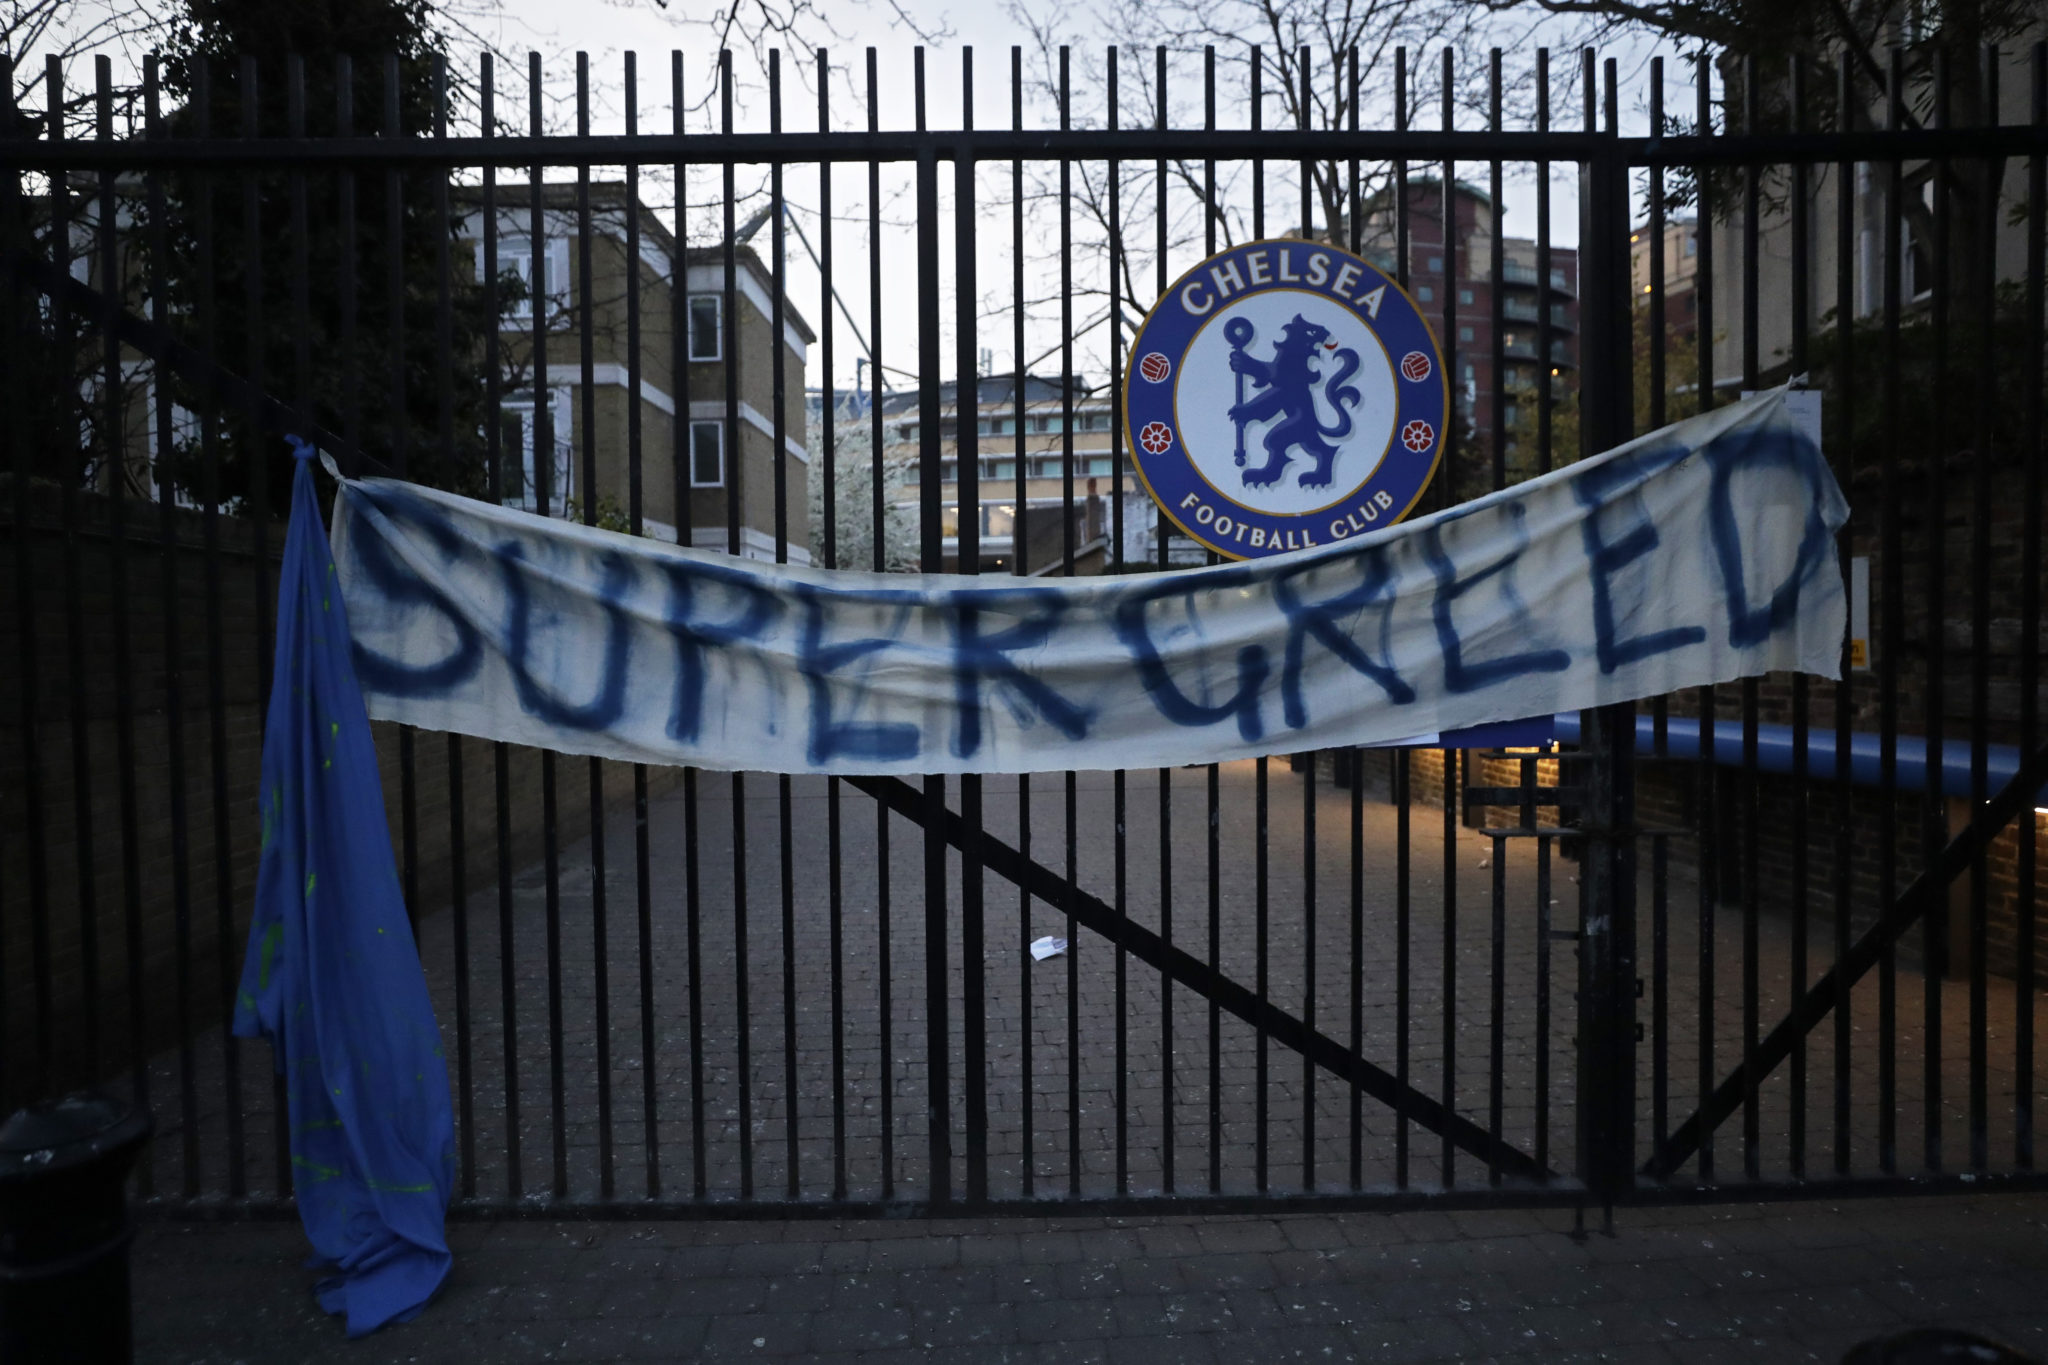 A banner hangs from one of the gates of Stamford Bridge stadium in London where Chelsea fans were protesting against Chelsea's decision to be included amongst the clubs attempting to form a new European Super League